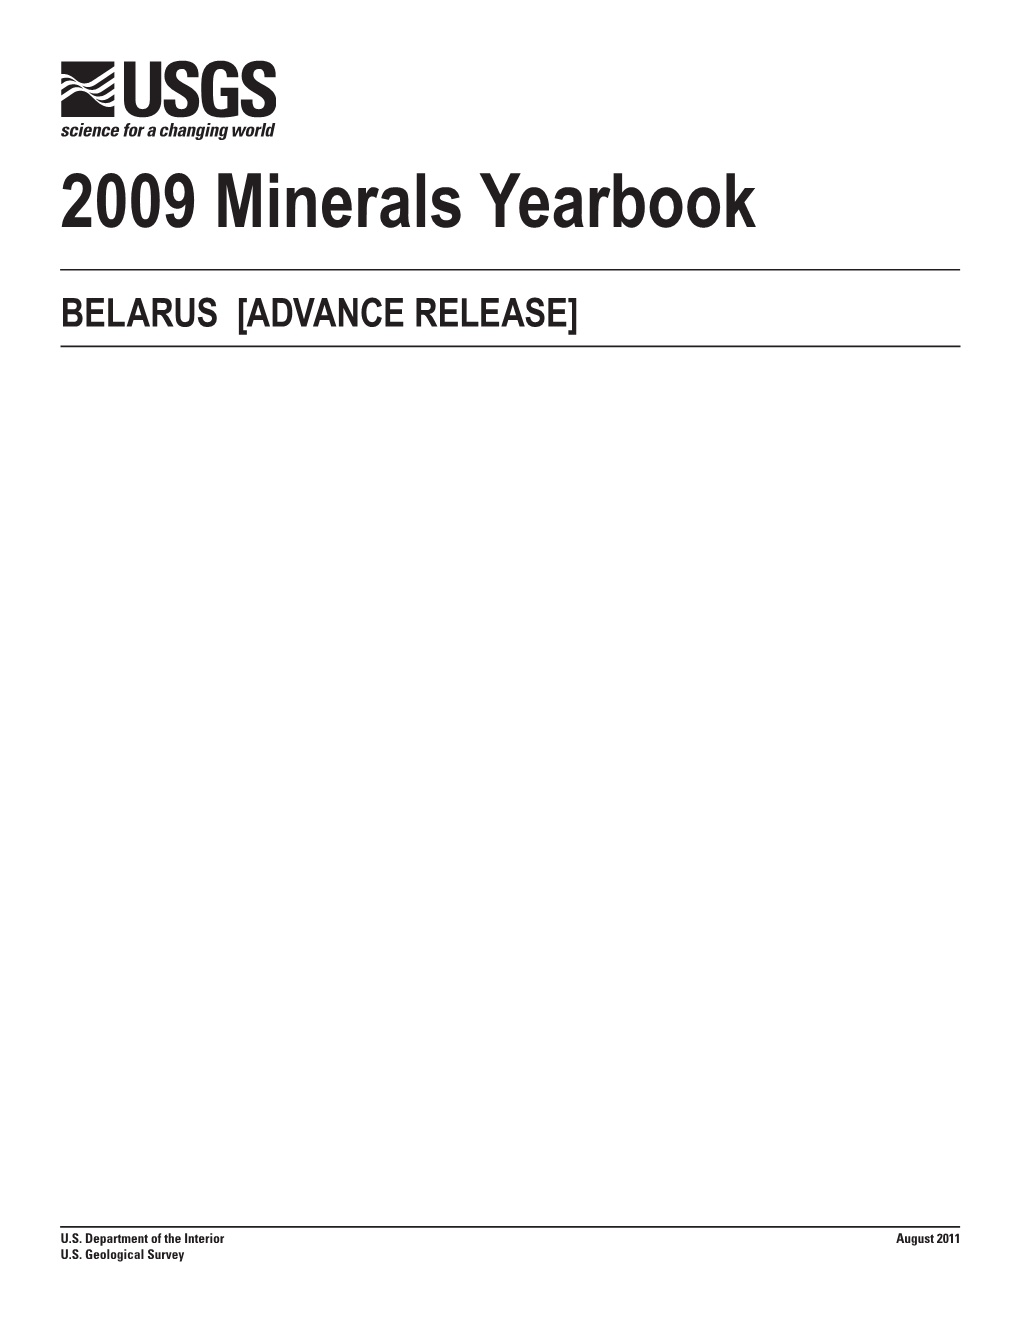 The Mineral Industry of Belarus in 2009